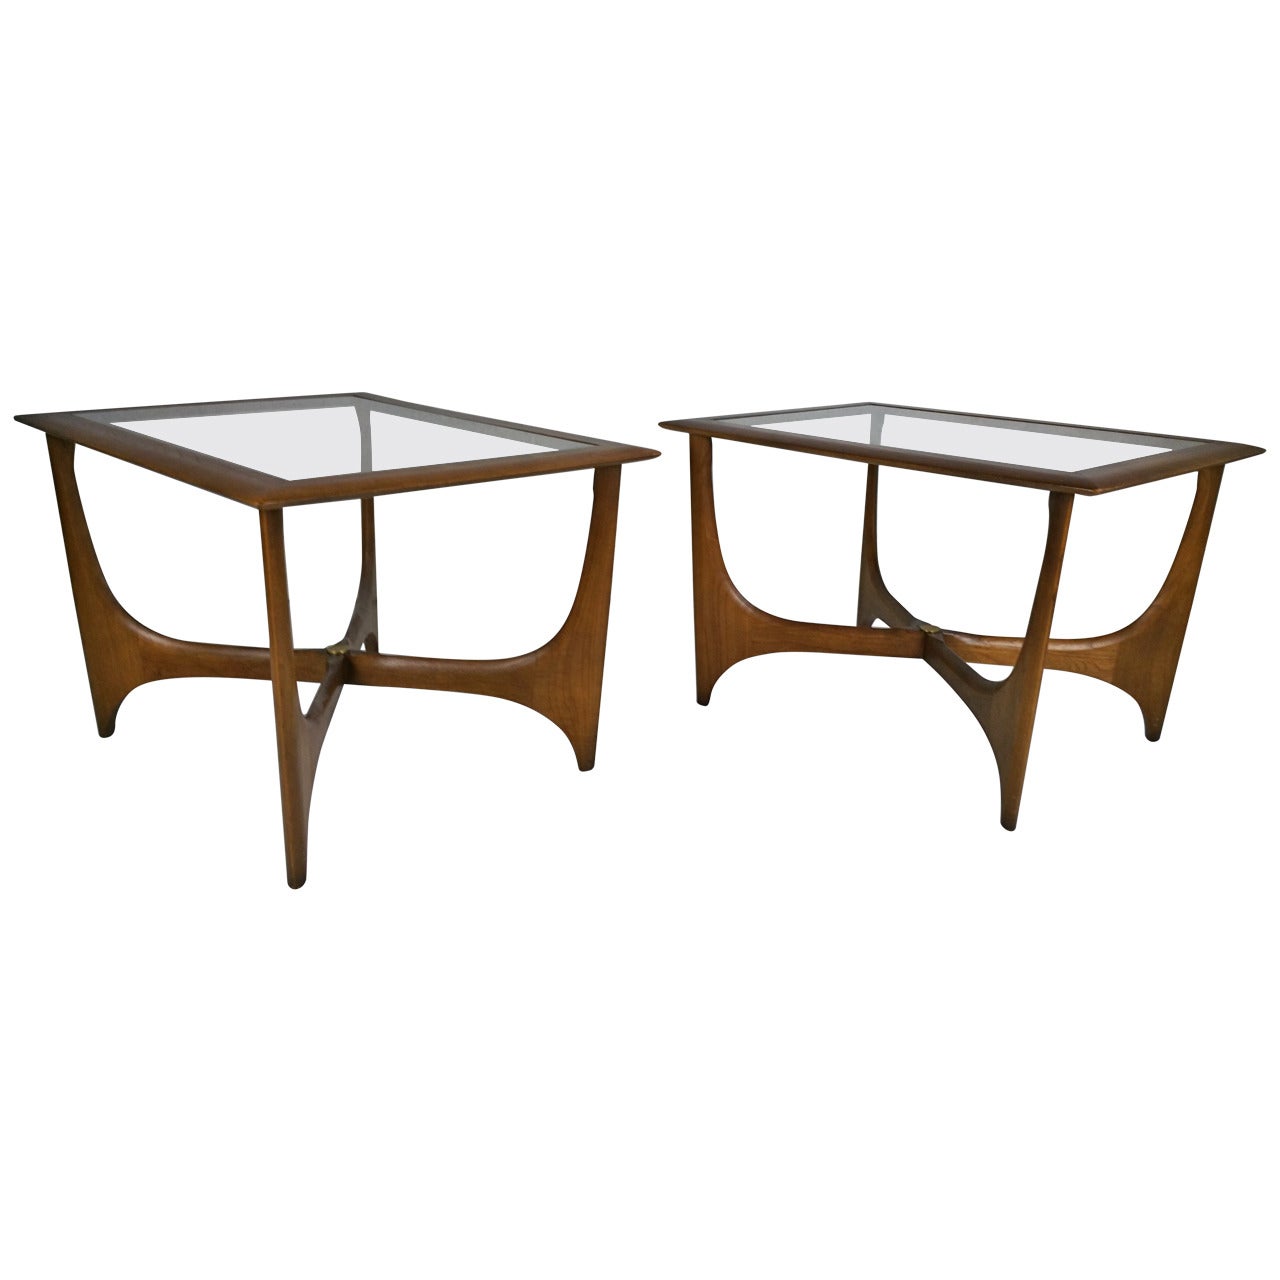 Pair of Mid-Century Modern Walnut and Glass Side Tables, Made by Lane